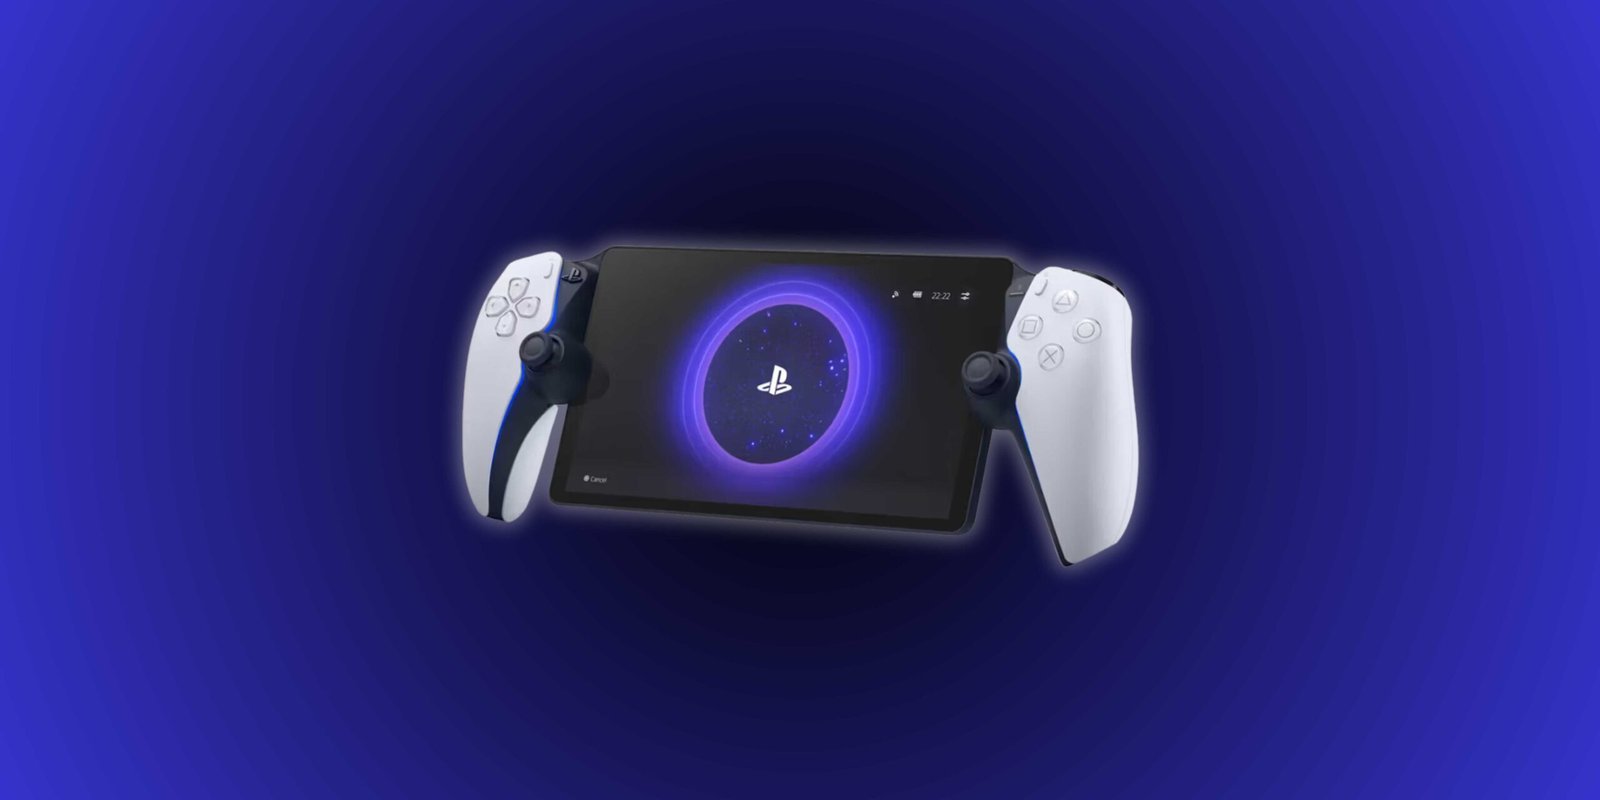 Sony introduces a new handheld gaming device